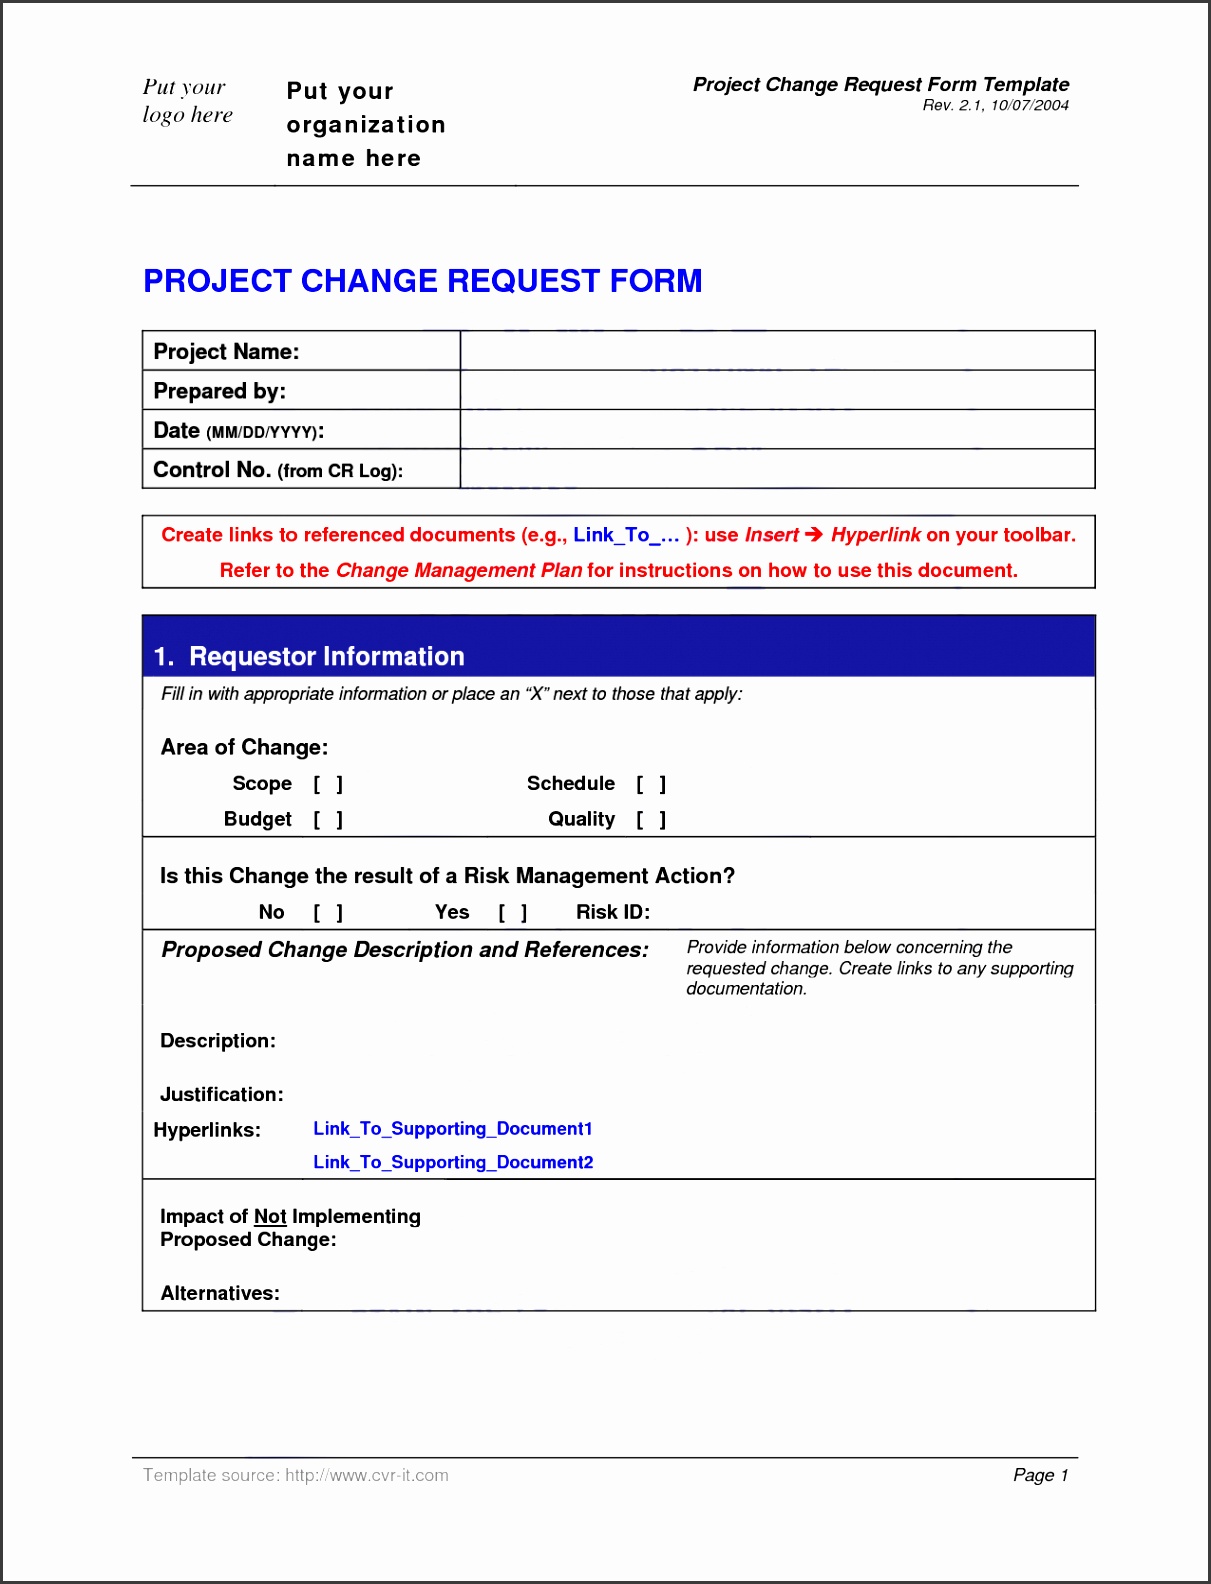 Project Change Request Form Template